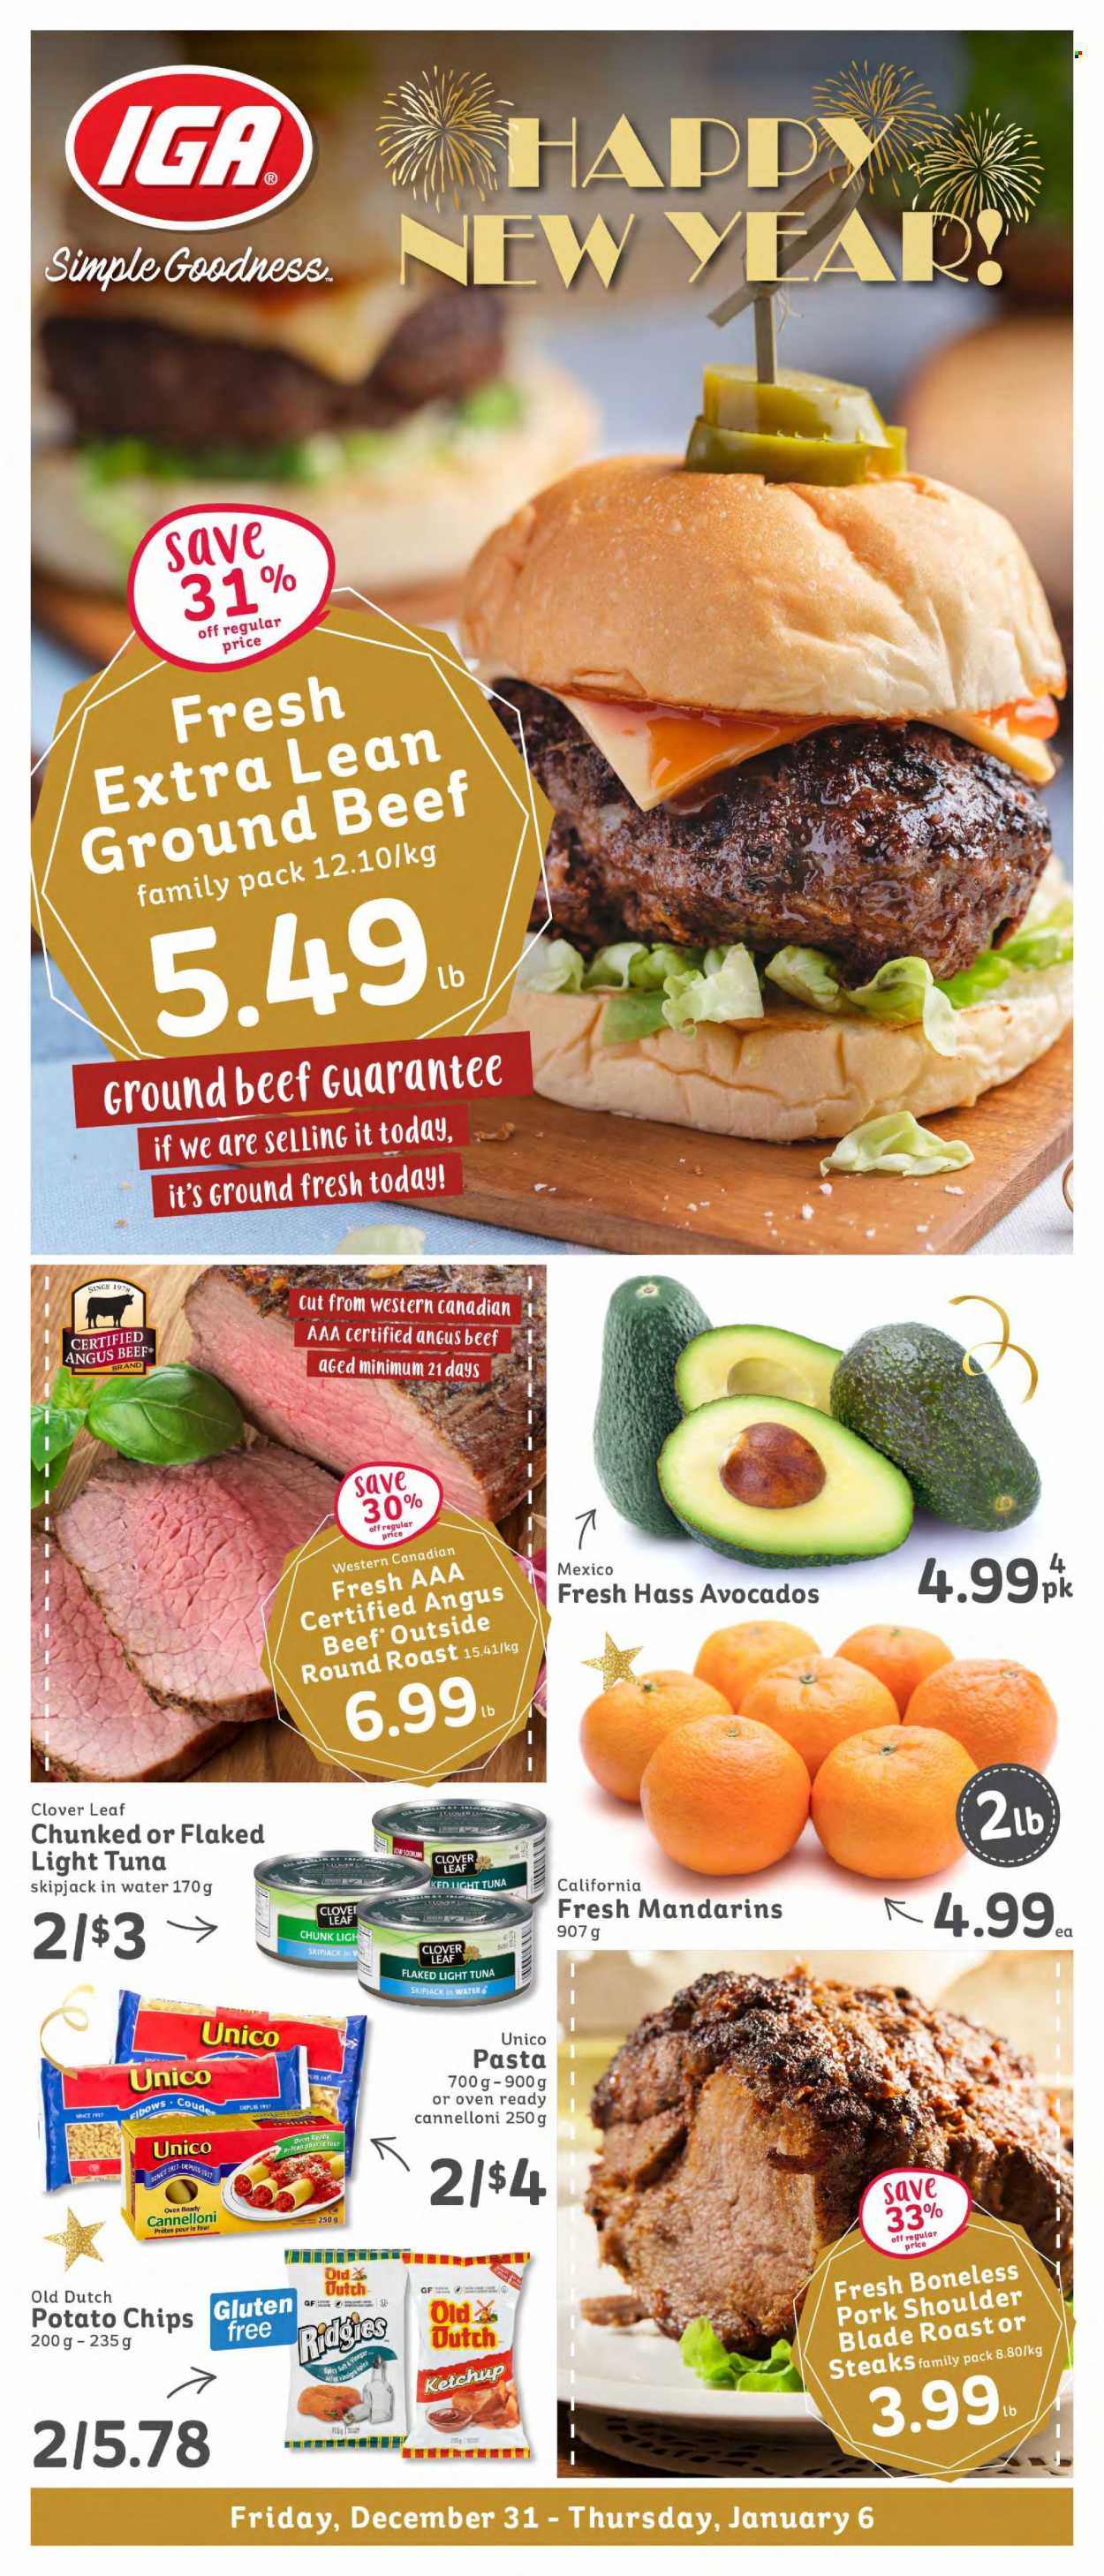 thumbnail - IGA Simple Goodness Flyer - December 31, 2021 - January 06, 2022 - Sales products - avocado, mandarines, tuna, pasta, Clover, potato chips, light tuna, beef meat, ground beef, round roast, pork meat, pork shoulder, ketchup, chips, steak. Page 1.